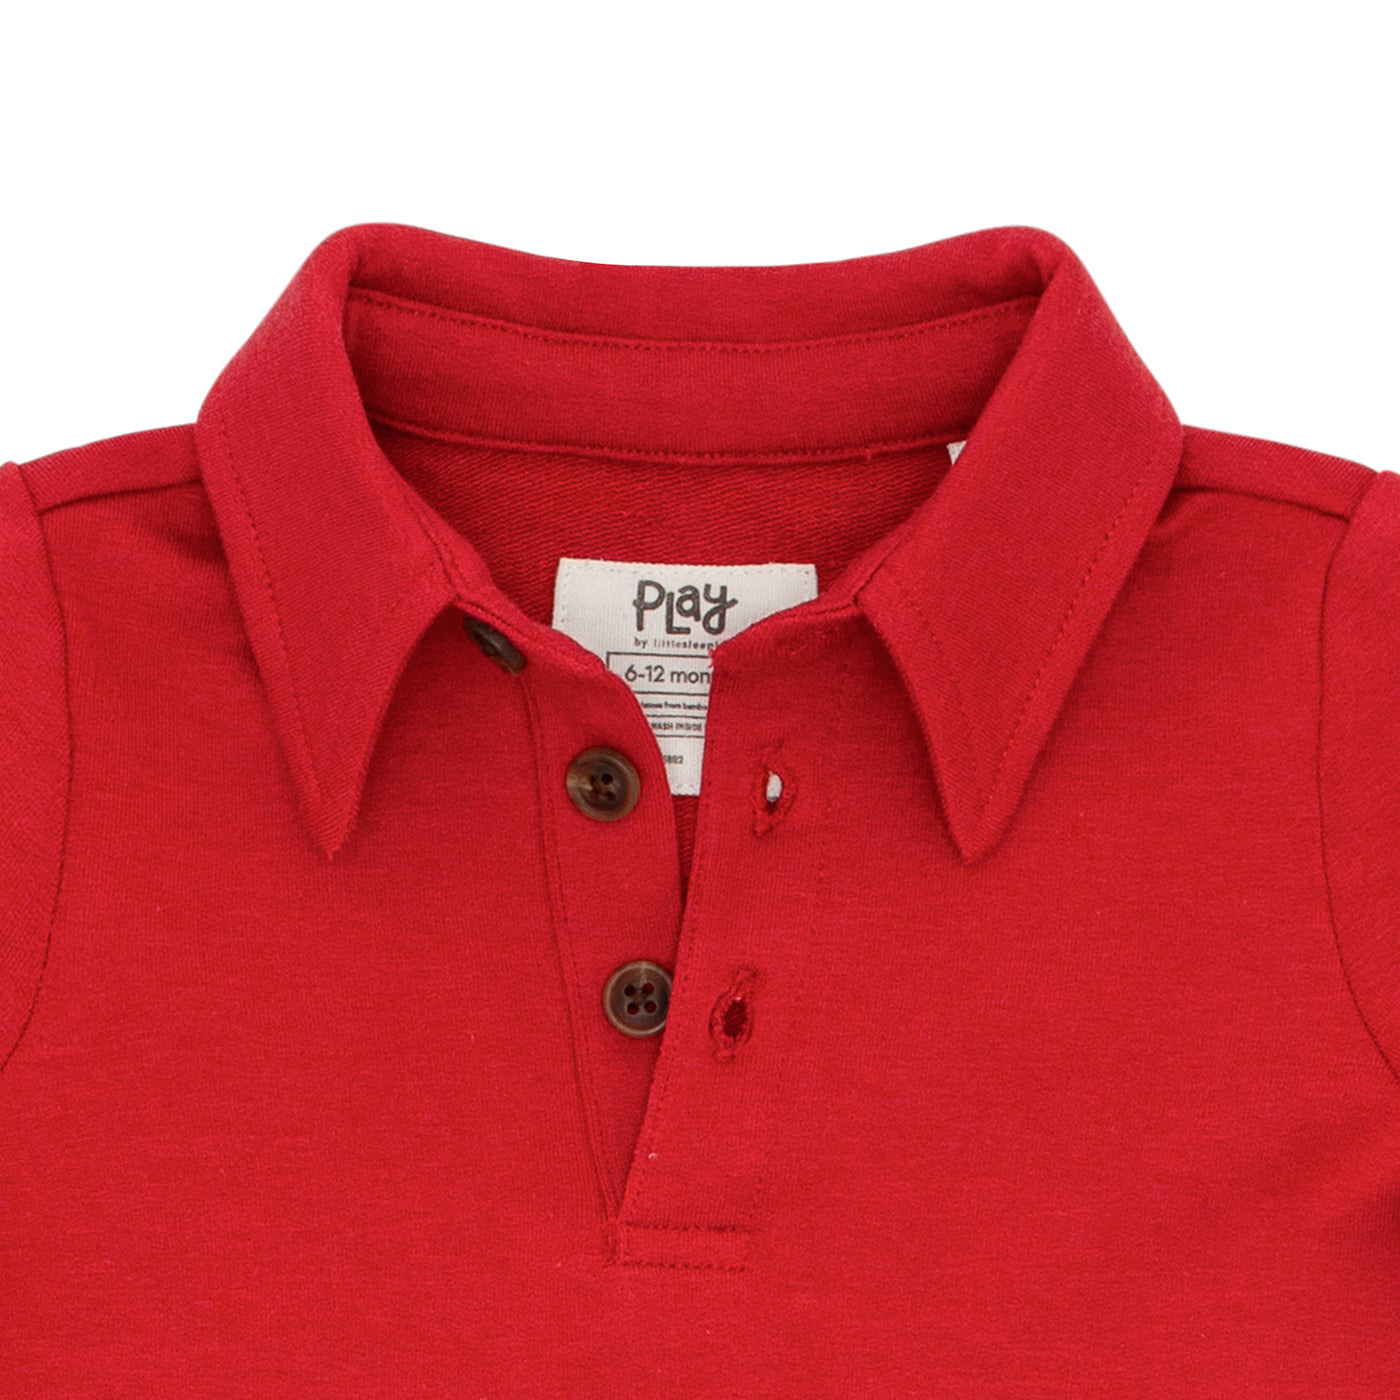 Close up image detailing the buttons on a Holiday Red polo shirt